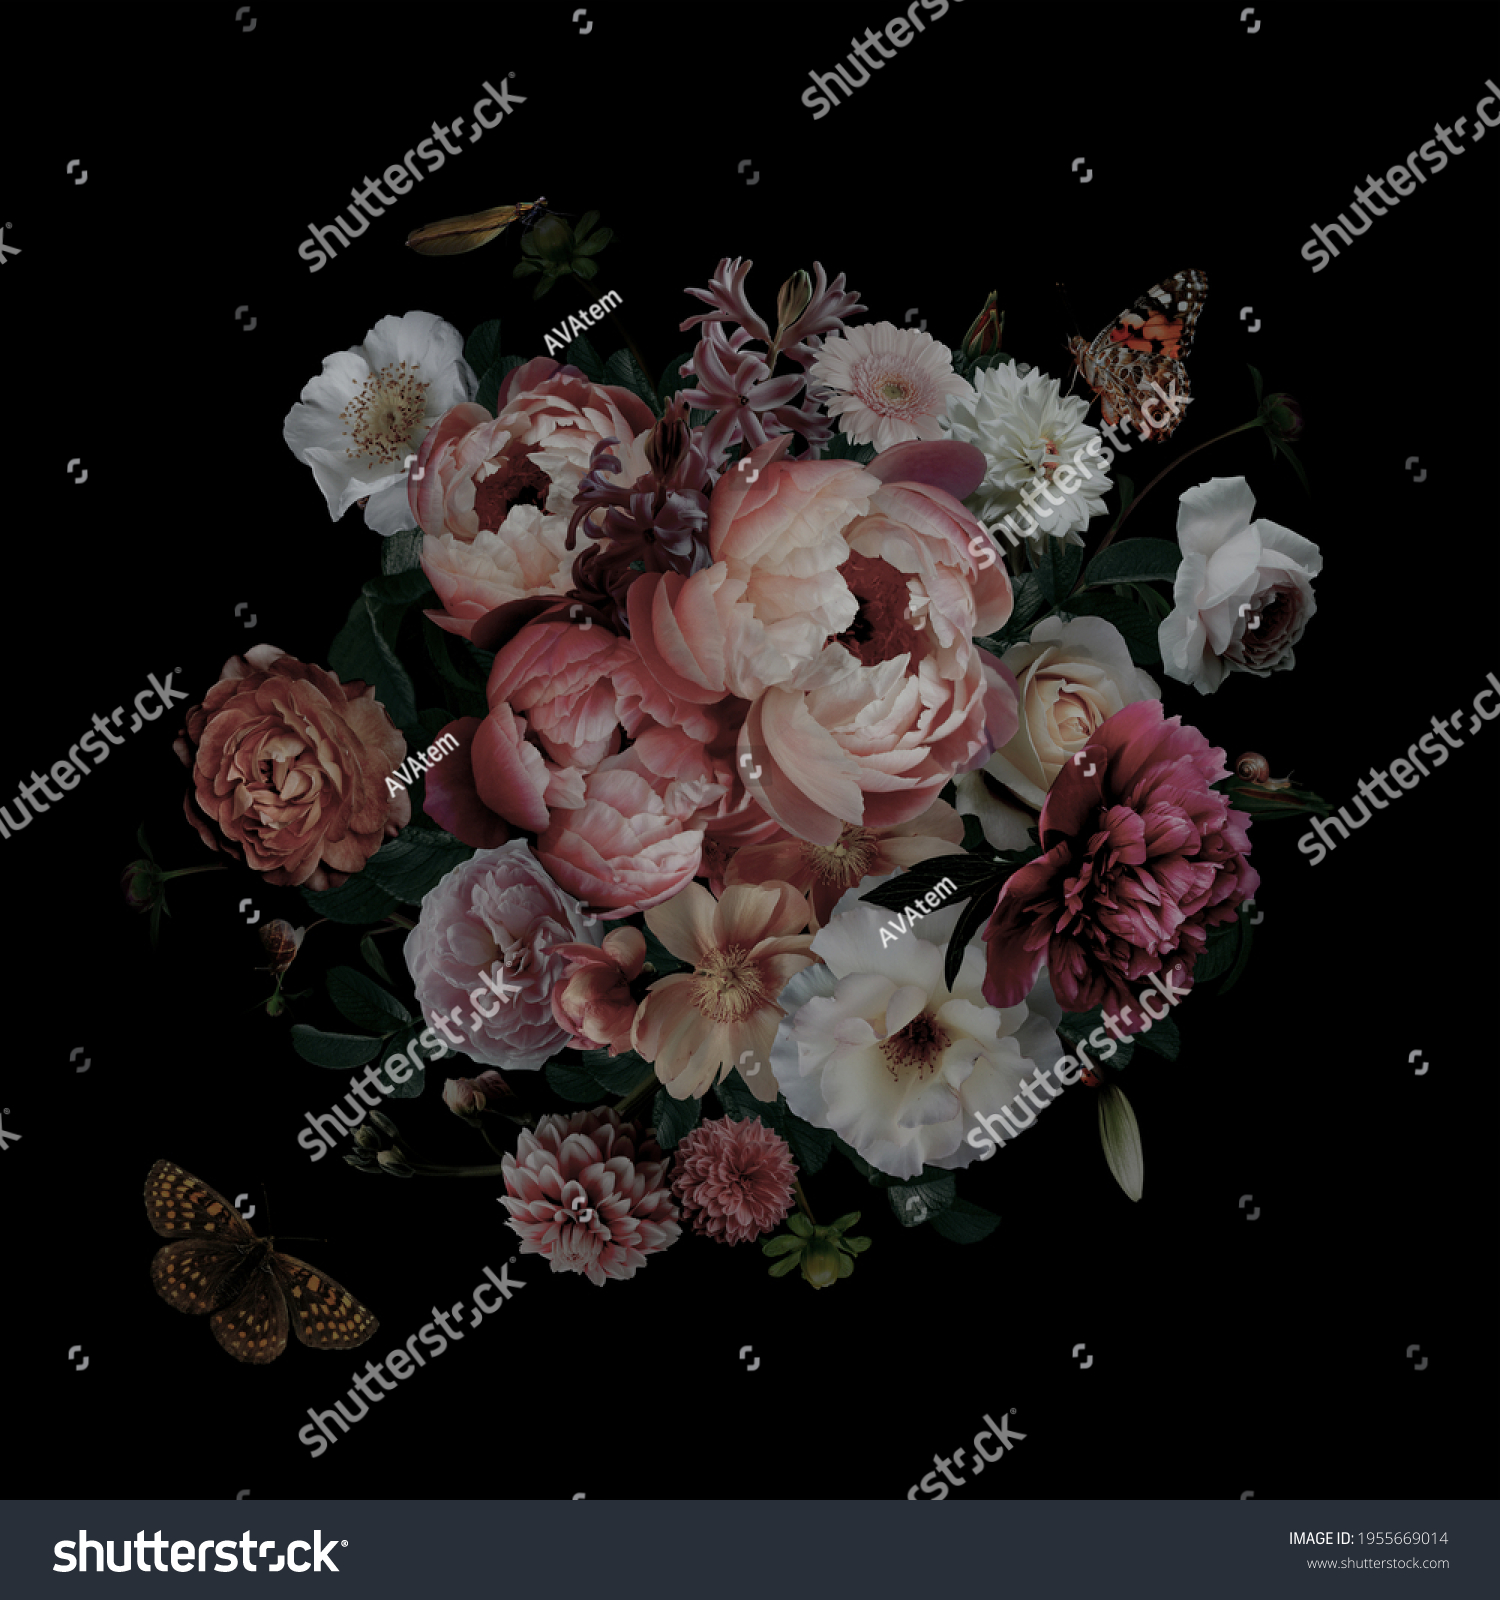 Luxurious baroque and victorian bouquet. Beautiful garden flowers, leaves and butterfly on black background. Pink and white peonies, roses. Vintage illustration. Floral decoration advertising material #1955669014